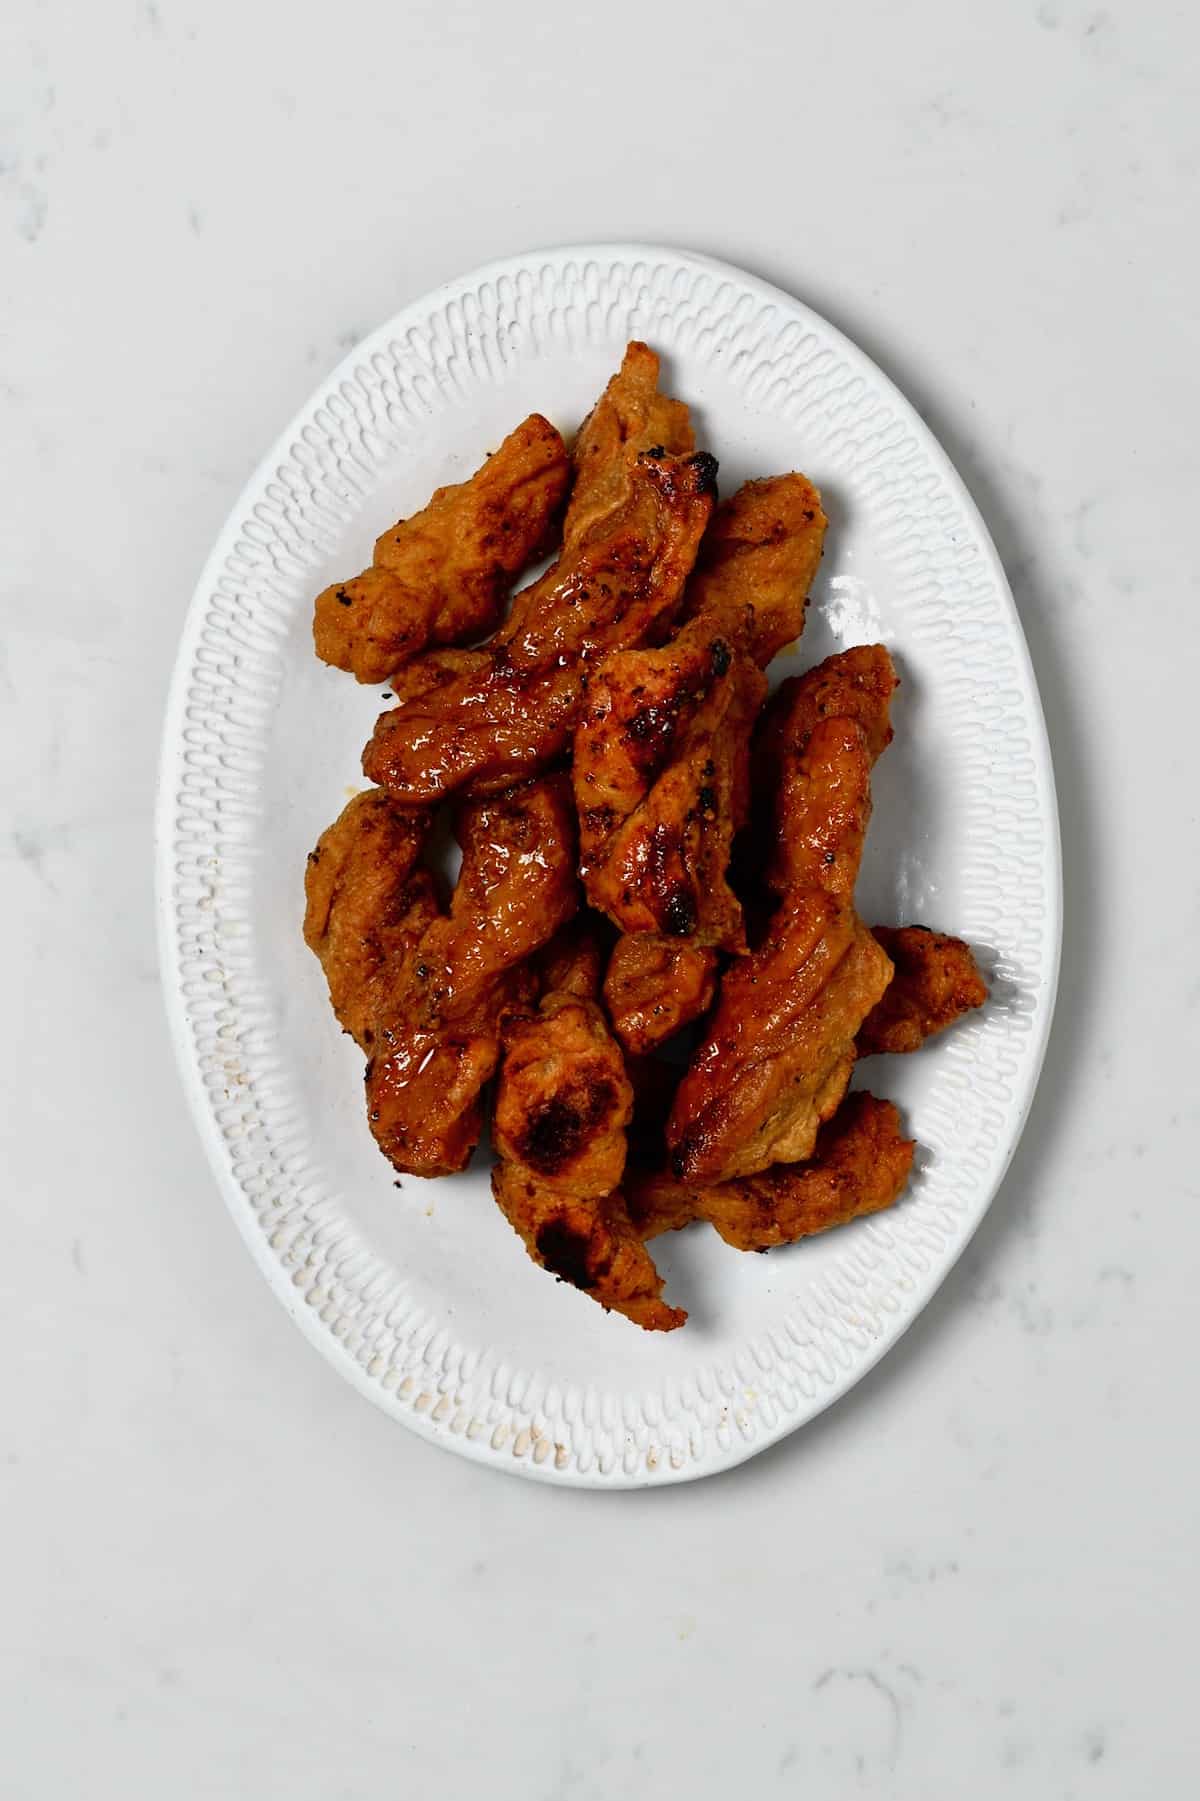 A plate with cooked seitan